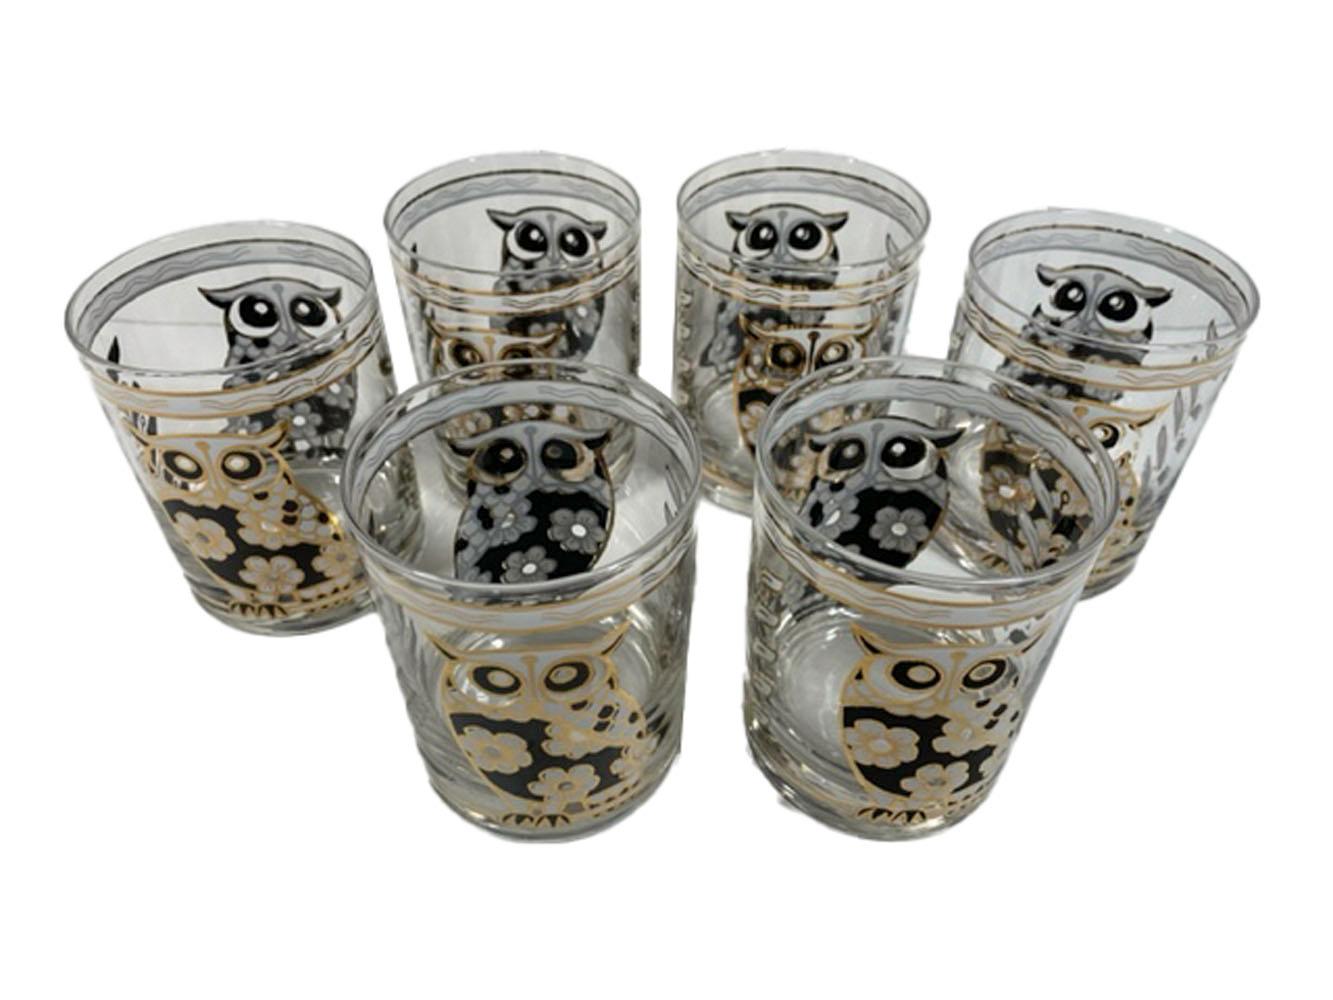 Six vintage rocks glasses by Cera Glassware decorated in black and white enamel with 22 karat gold detail. Each glass with an owl front and back, in black and white enamel with a pattern of cherry blossoms making up their bodies and accented with